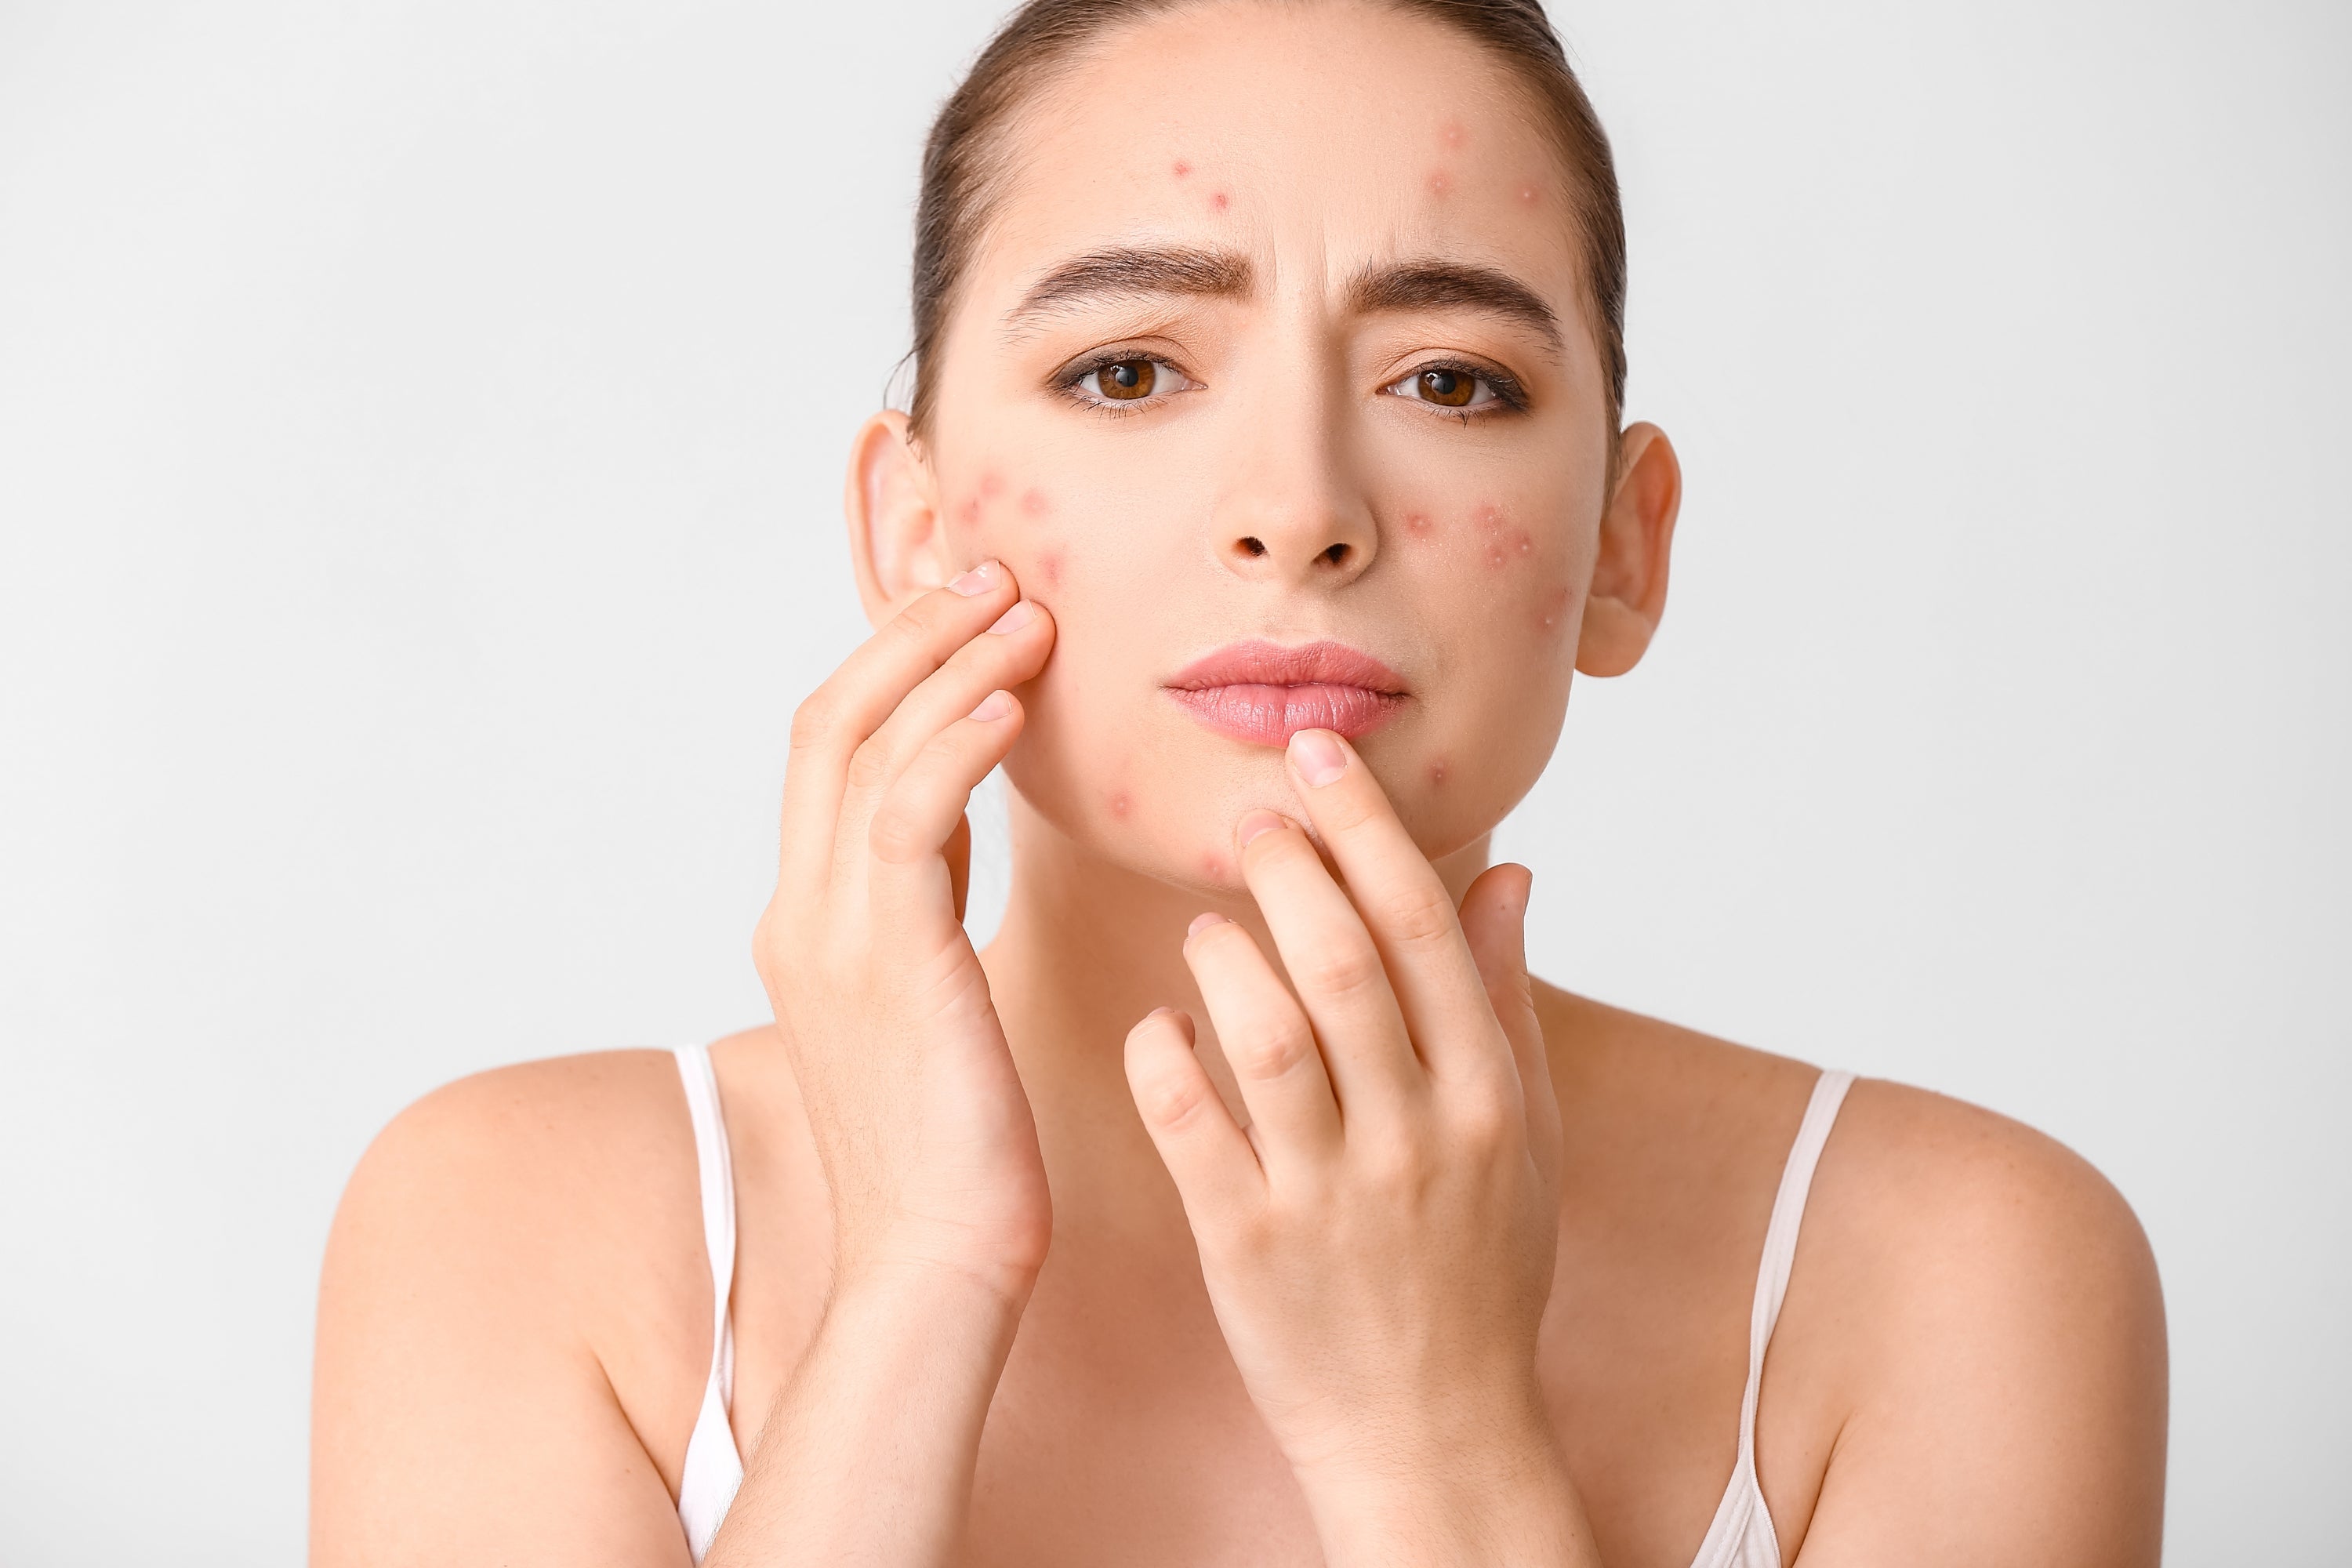 Woman with acne touching her face